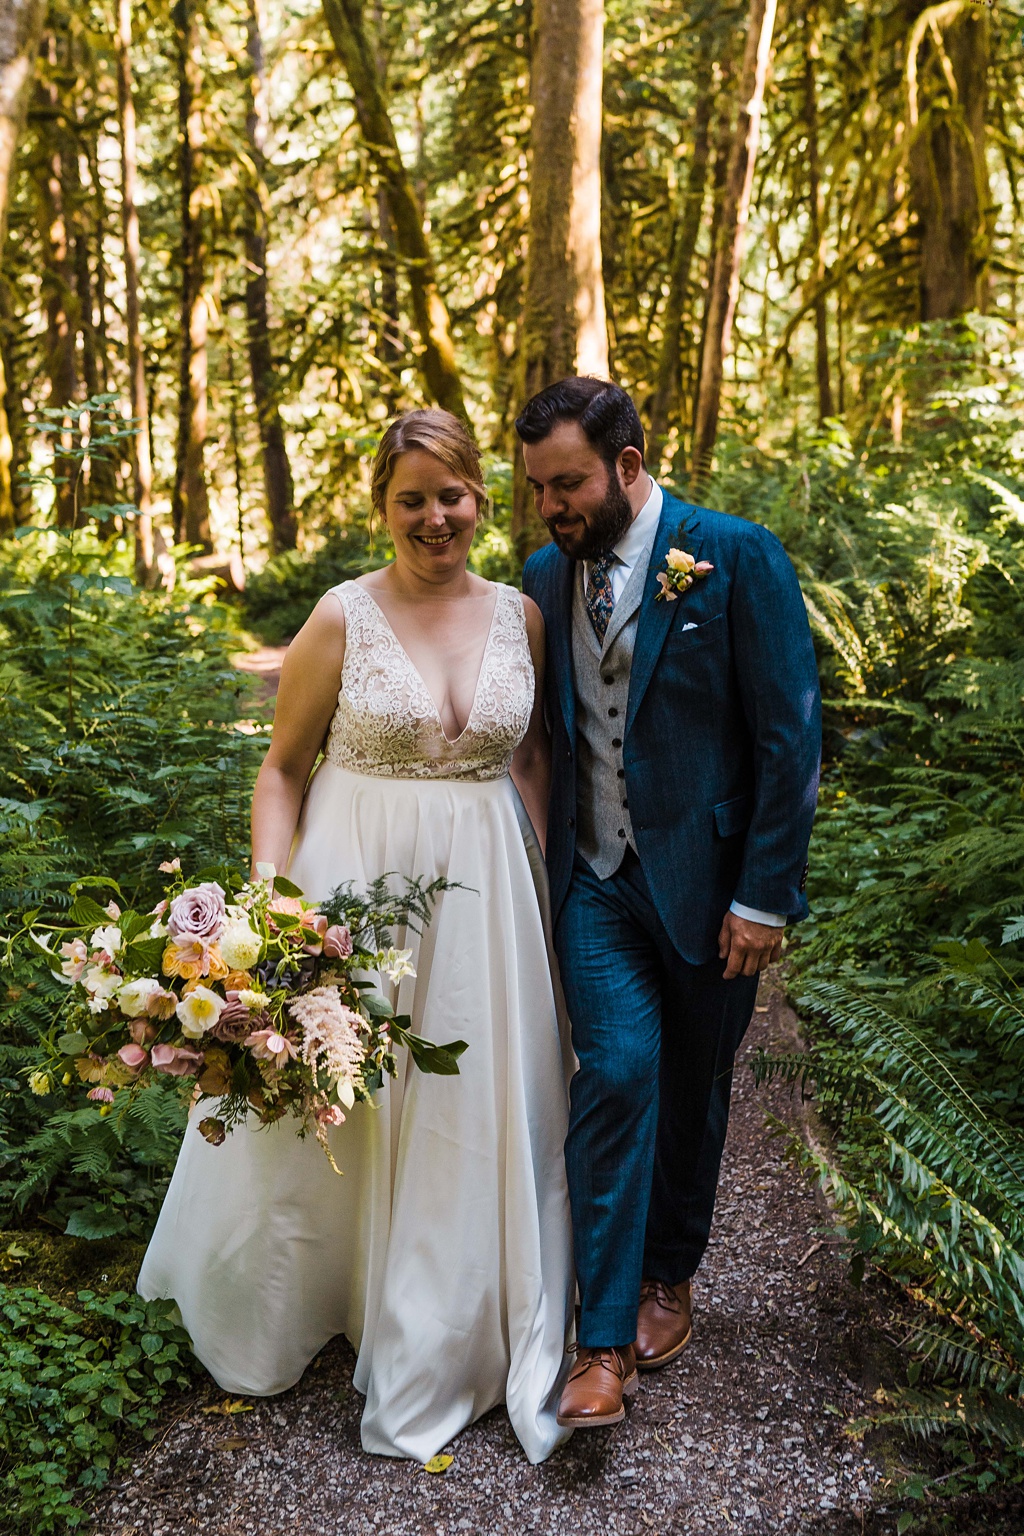 The couple walks in the woods holding the bouquet